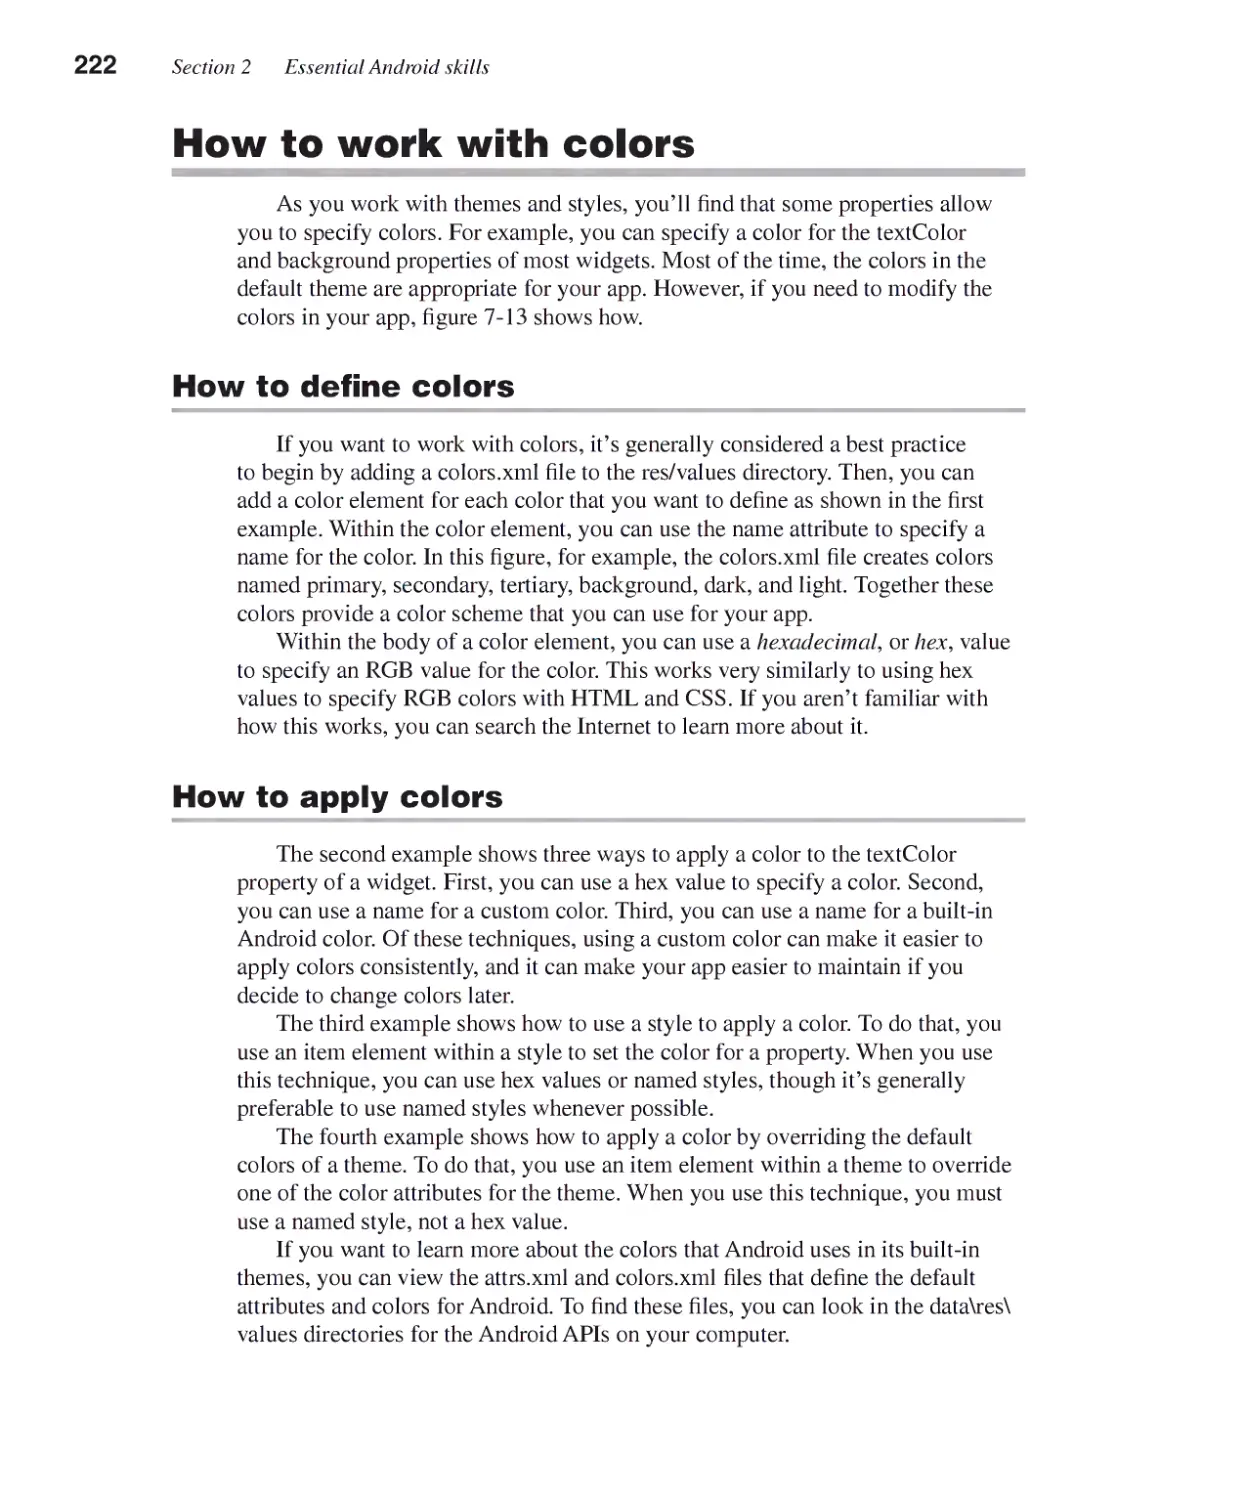 How to Work with Colors